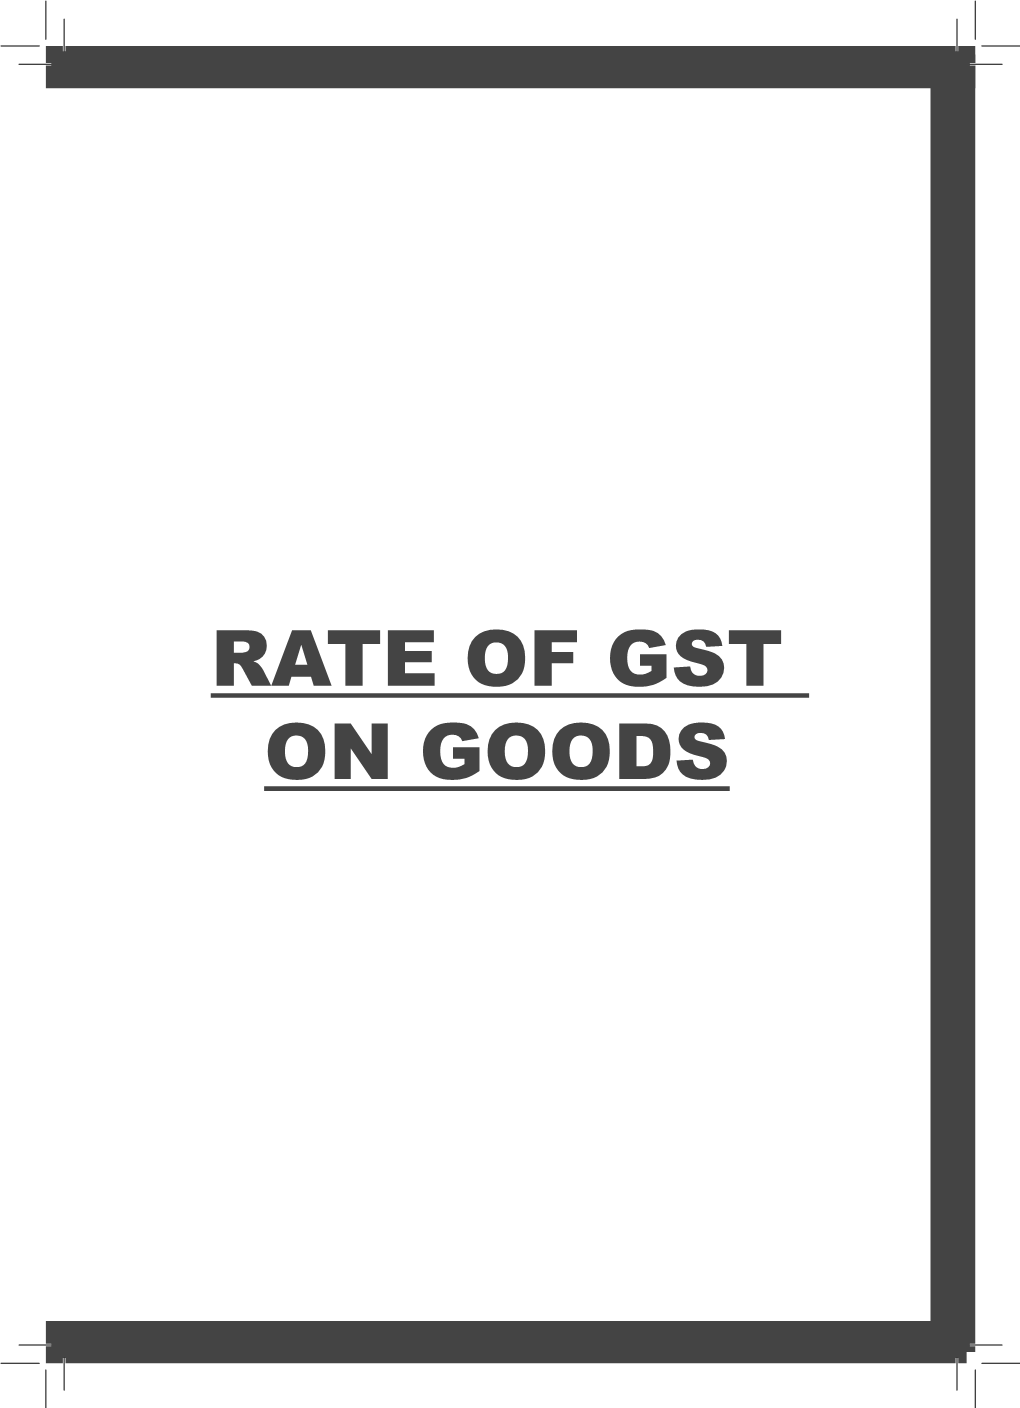 Rate of Gst on Goods